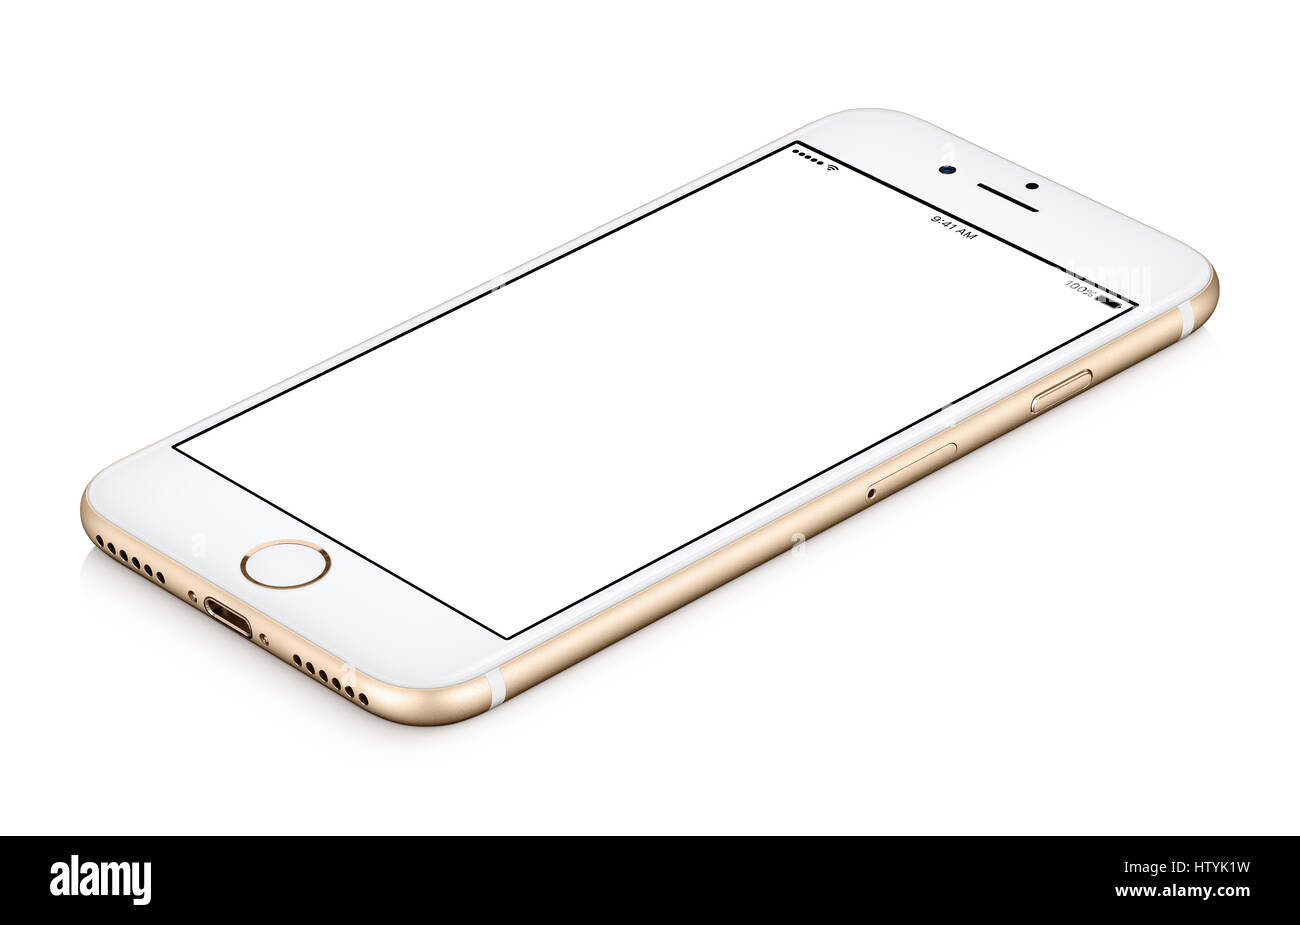 Gold mobile smart phone mock up clockwise rotated lies on the surface with blank screen isolated on white background. Stock Photo